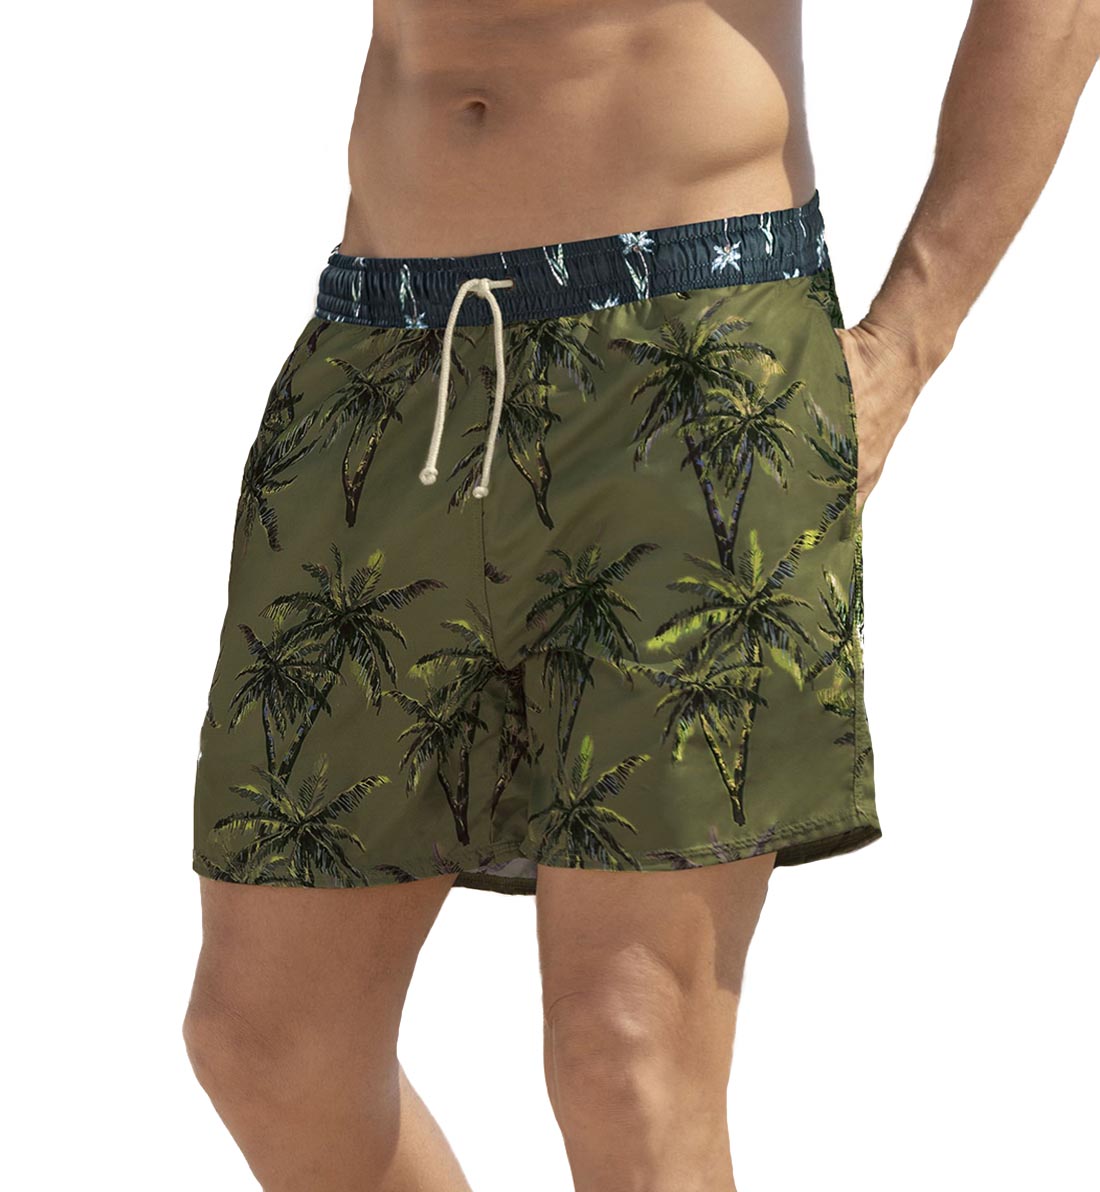 LEO Men's Printed Loose Fit Swim Trunk (505028),Small,Green Palm - Green Palm,Small